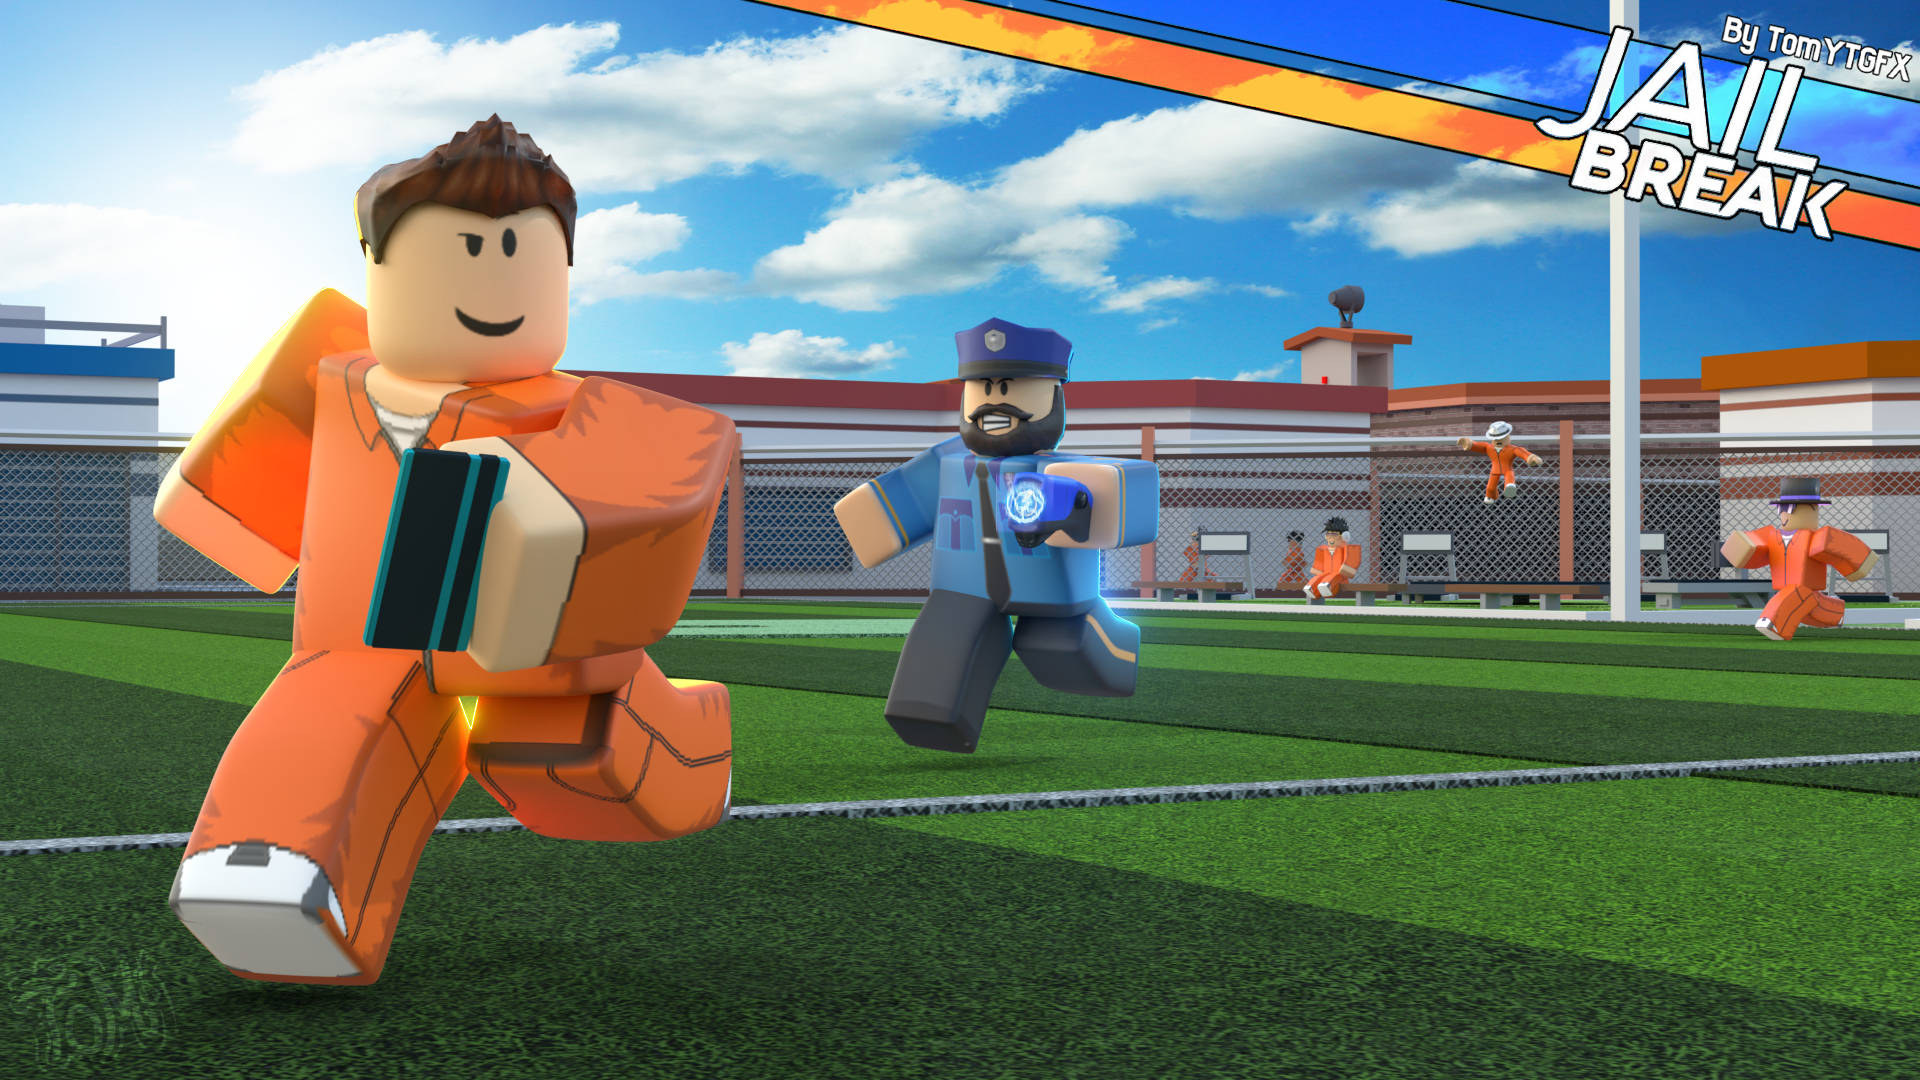 Welcome to the exciting world of Jailbreak on Roblox! Wallpaper